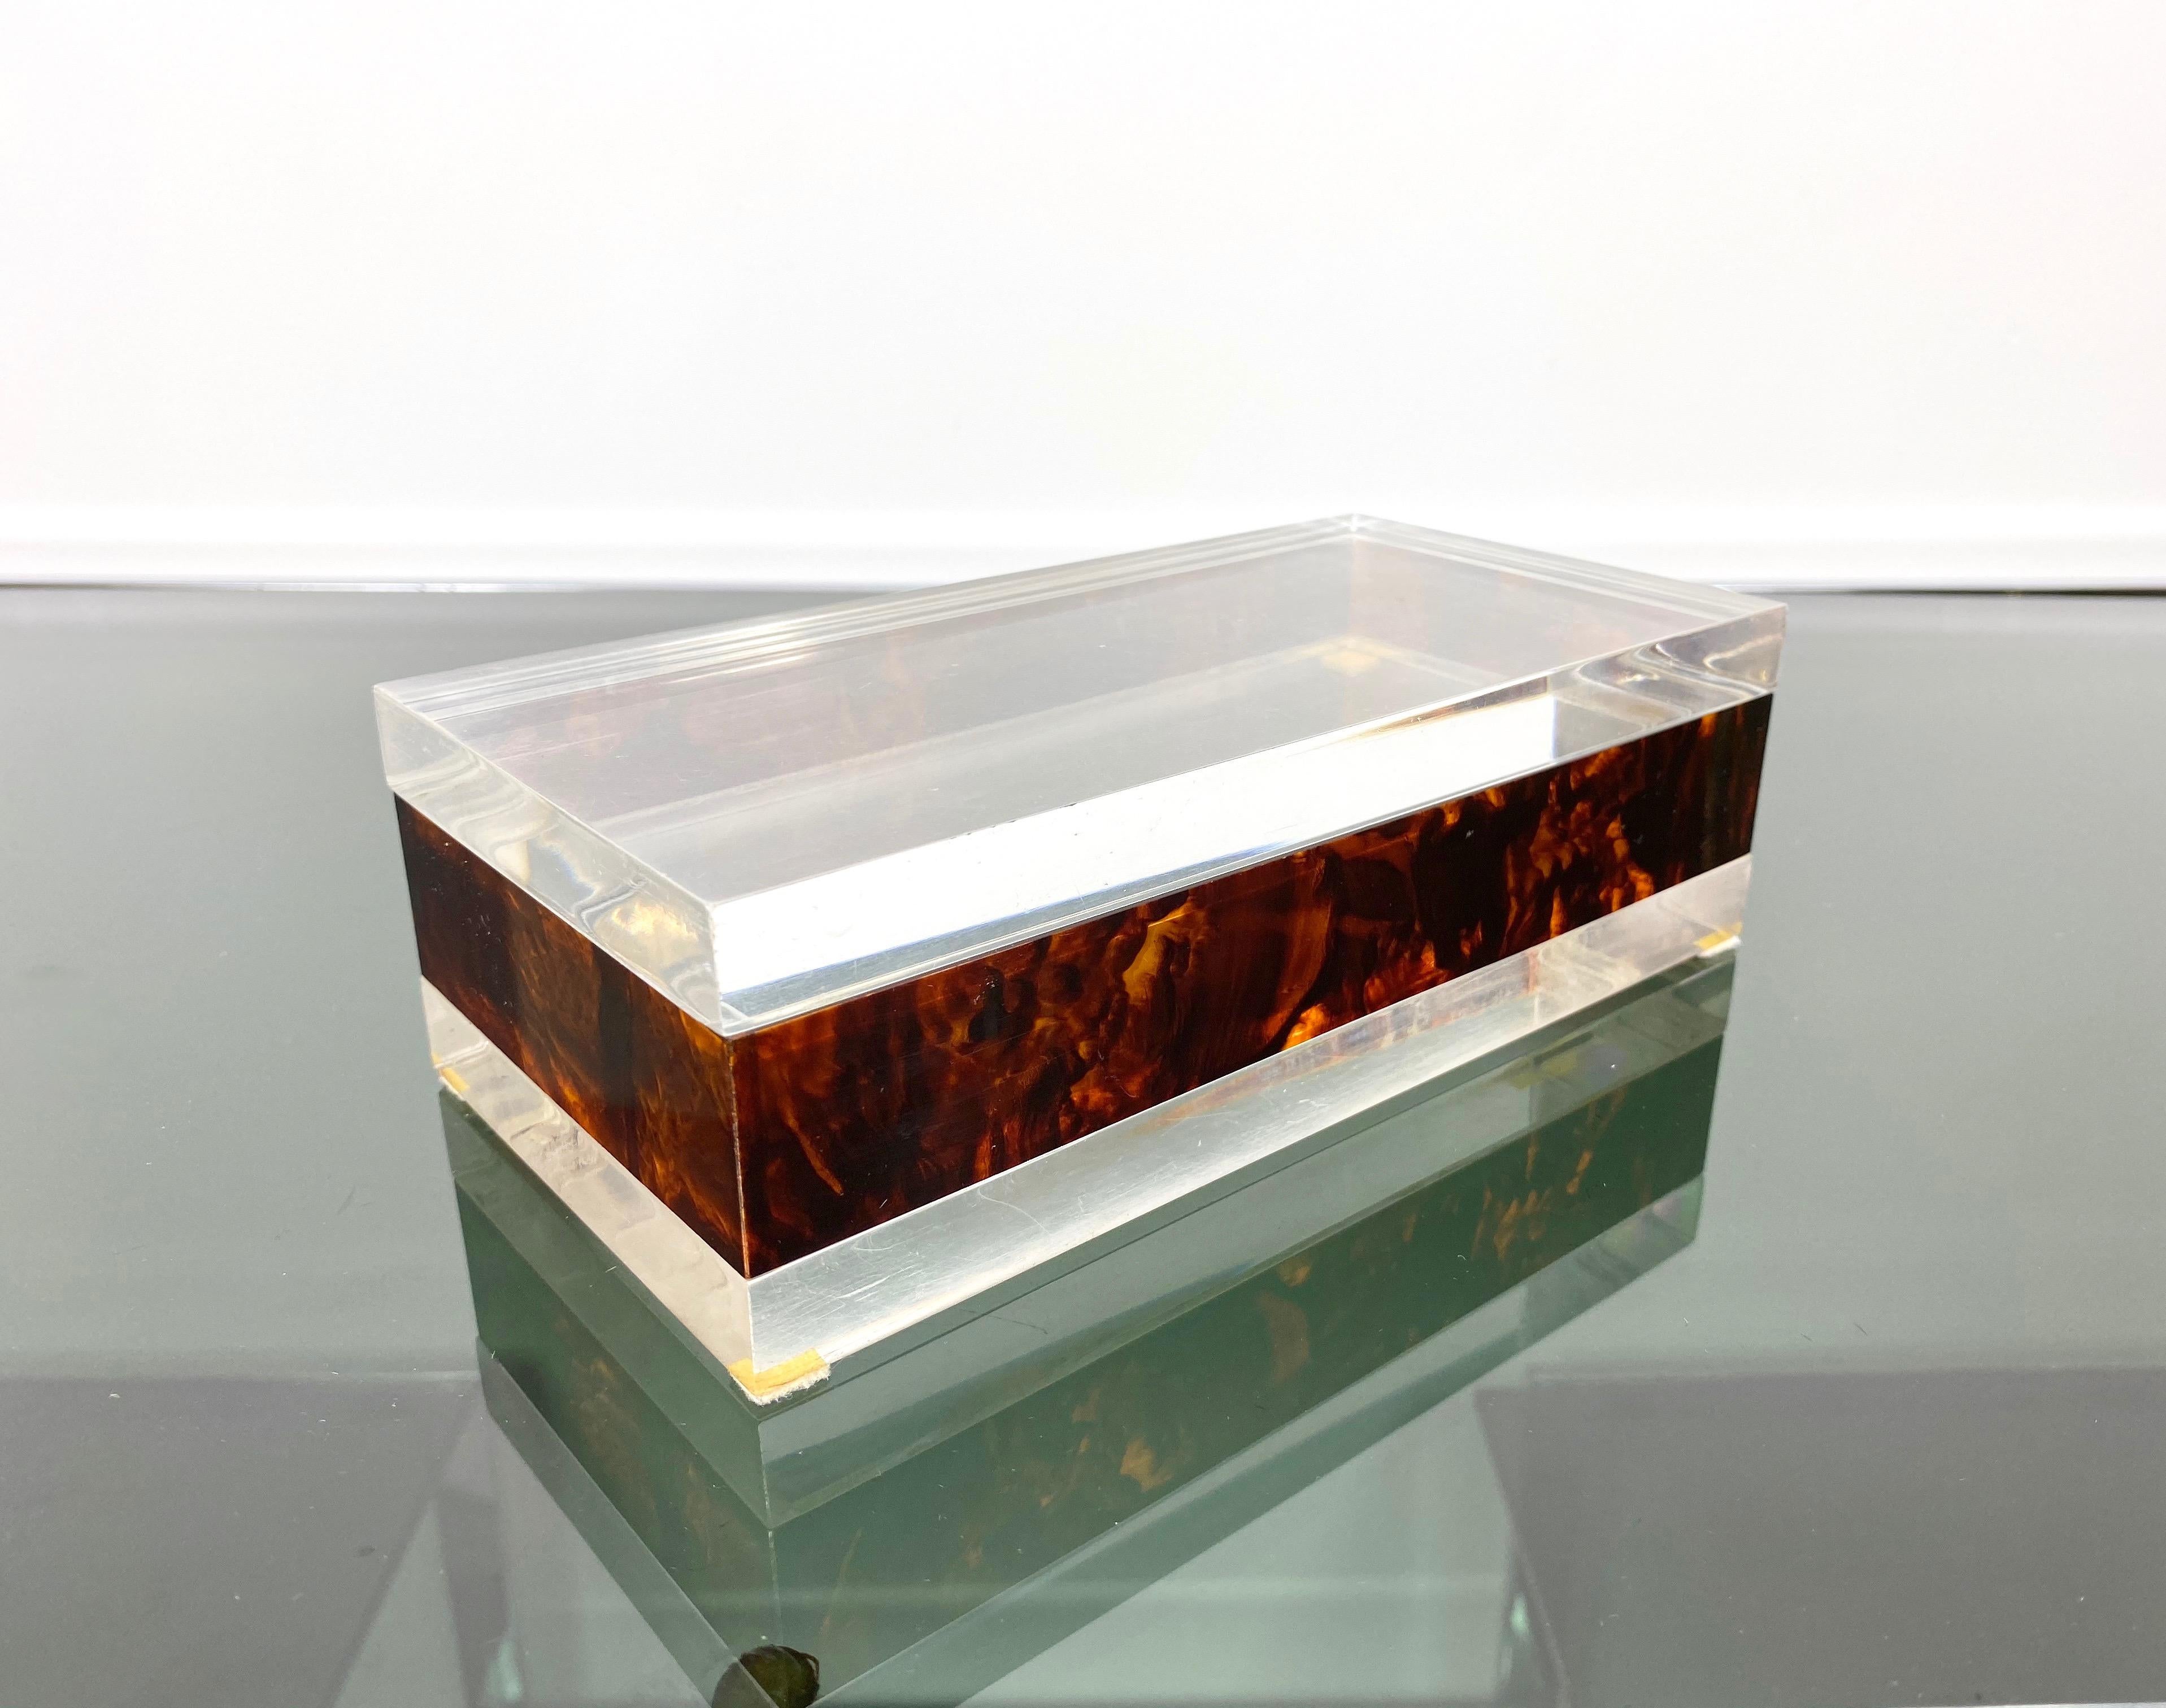 Lucite decorative box in a rectangular shape, featuring faux tortoiseshell Lucite details and a transparent, lucite cover. A typical example of Italian 1970s design.